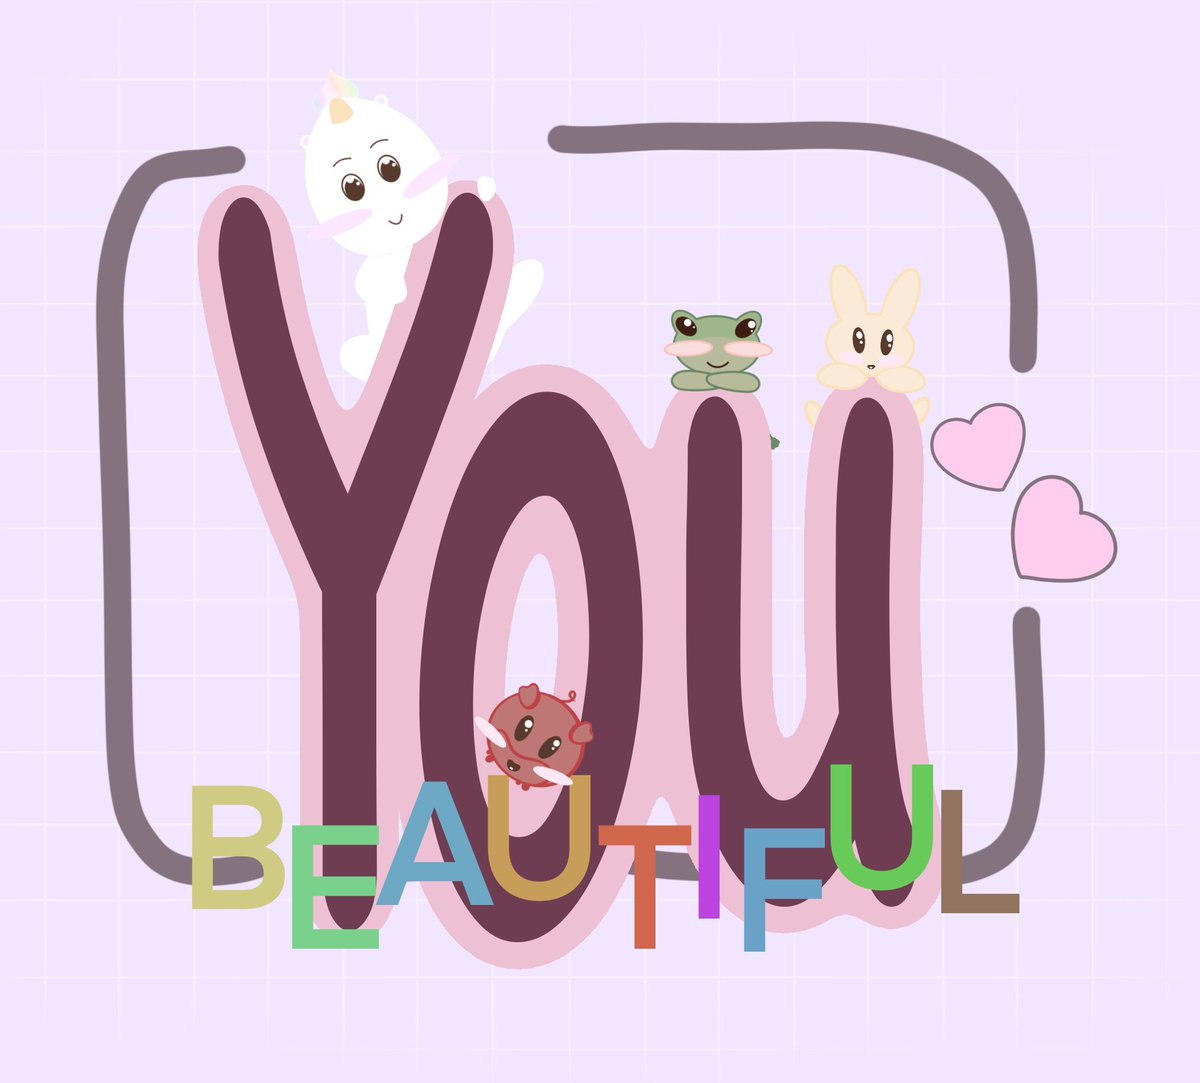 You! Beautiful! 
We don’t hear it enough. From us to you! 
╰(*´︶`*)╯♡
#stickers m #bujolove #bujo #unicorn #bulletjournal #bulletjournaling #kawaii #kawaiistickers #kawaiistuff  #bulletjournalstickers  #etsysellers #scrunchies #vinylstickers #etsyshop #smallbusiness